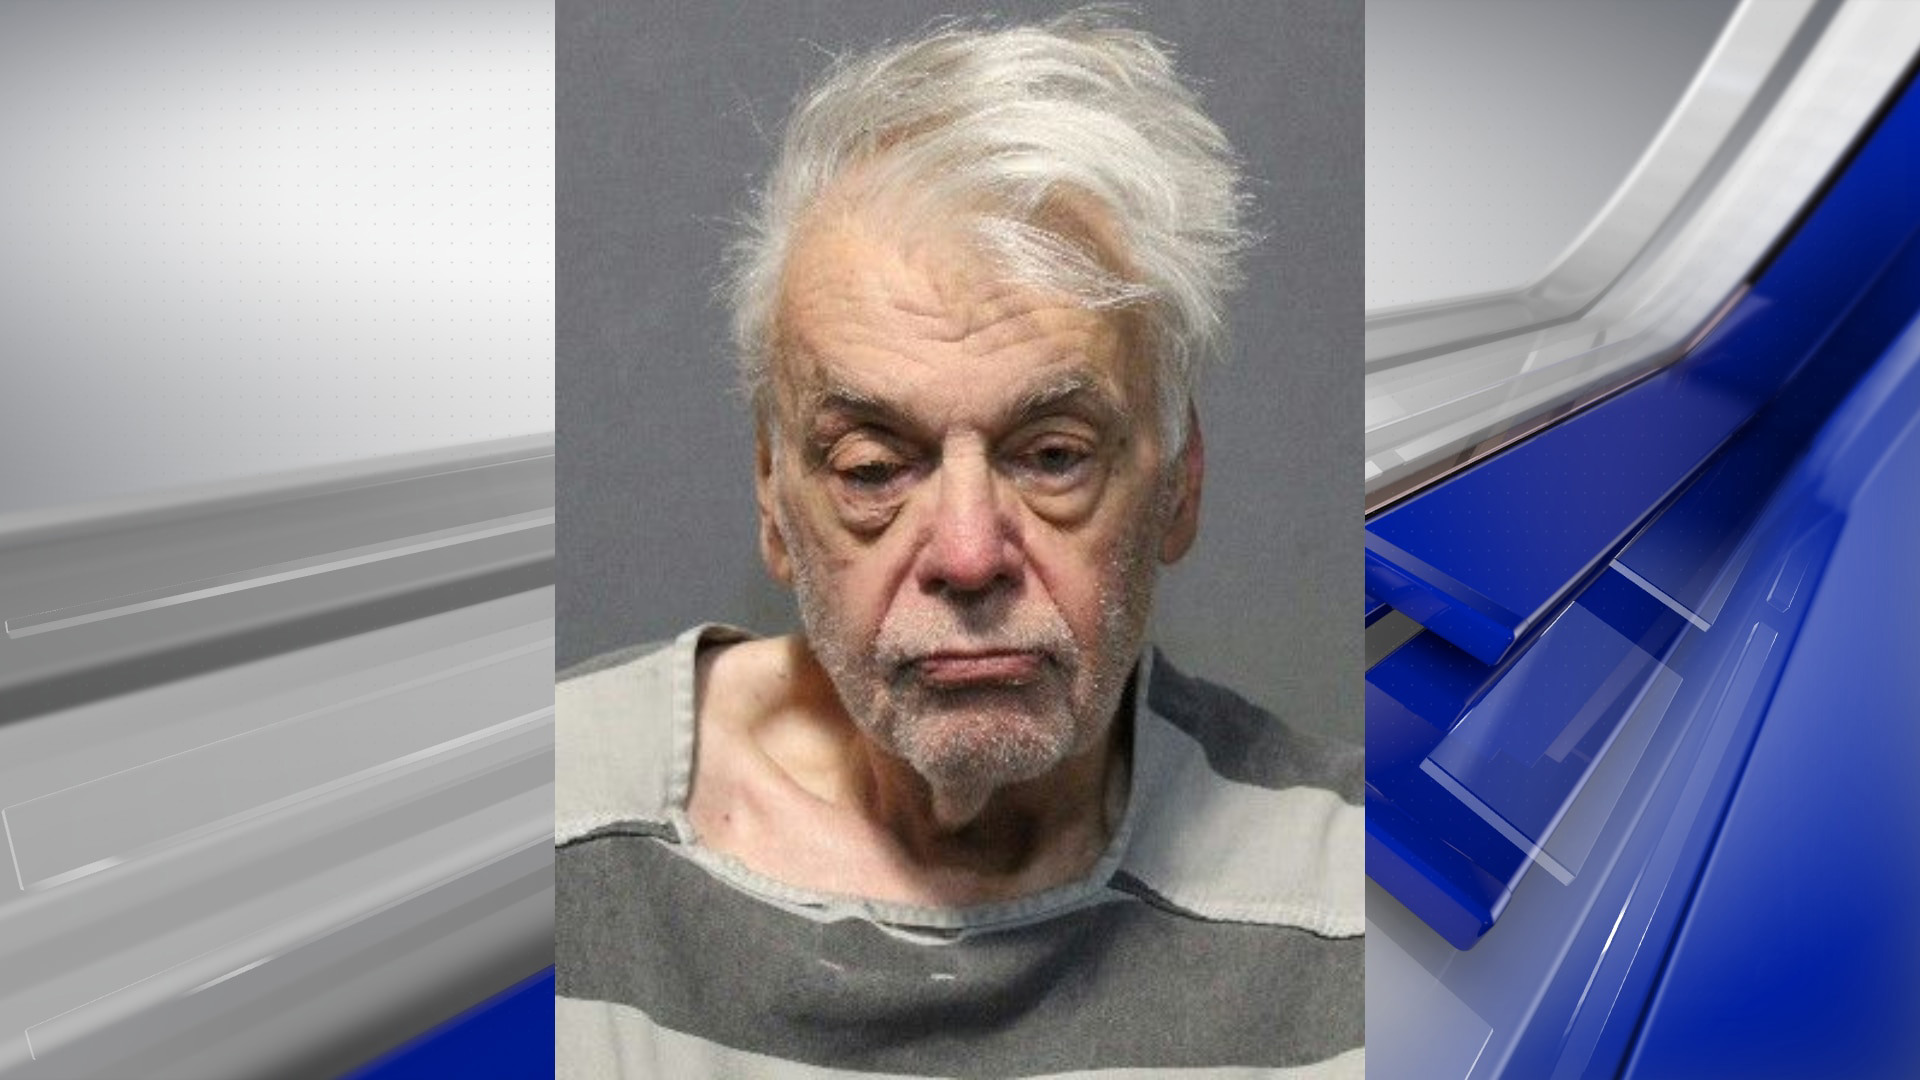 Michigan Man Accused Of Beating Killing Wife Charged With Murder Assault And Battery